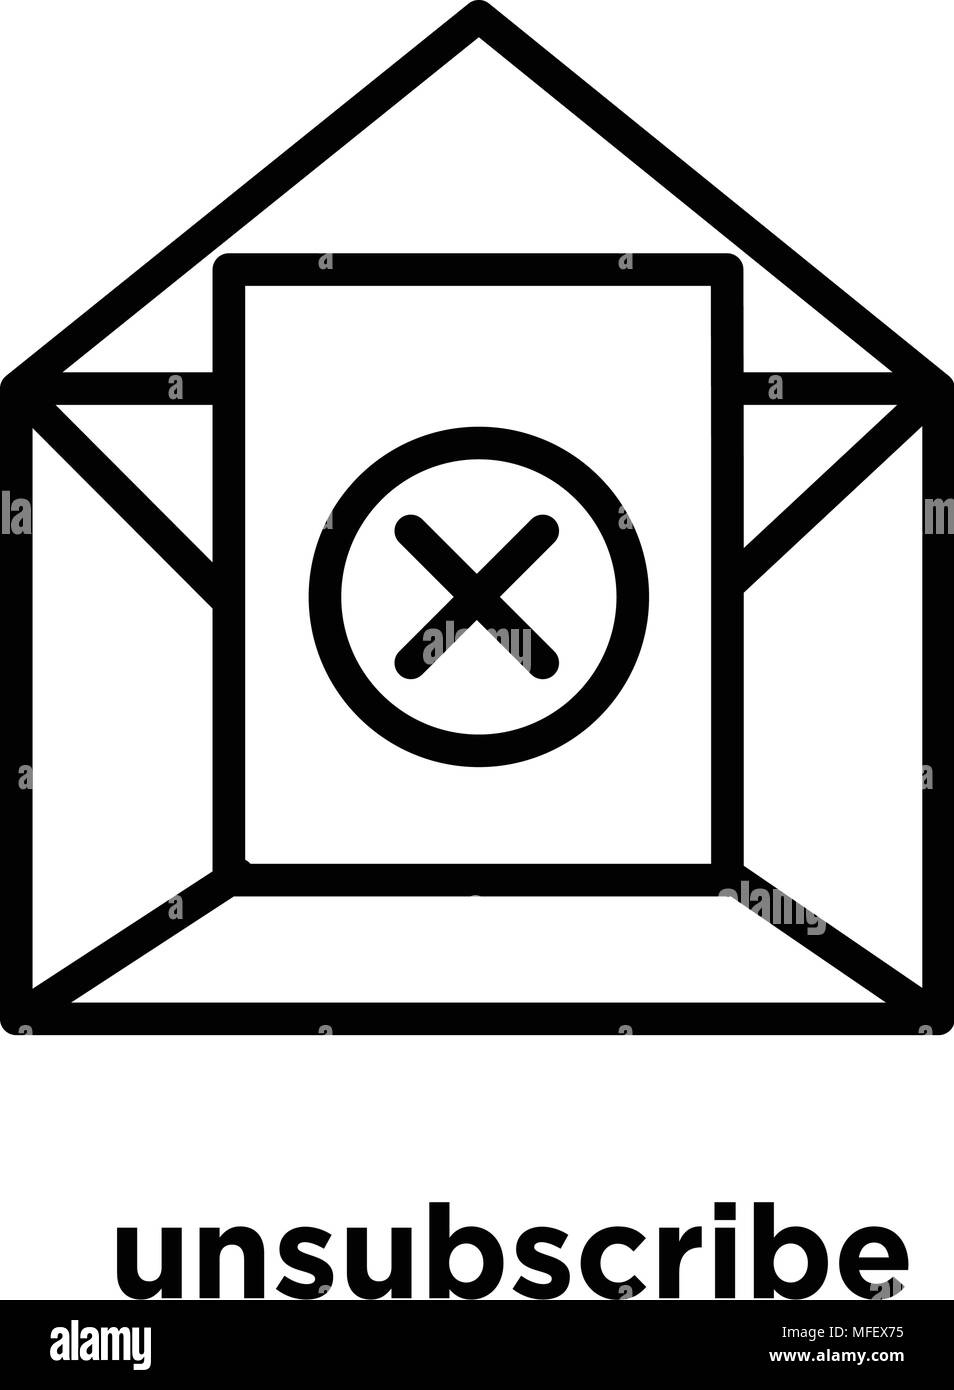 unsubscribe icon isolated on white background, vector illustration Stock Vector